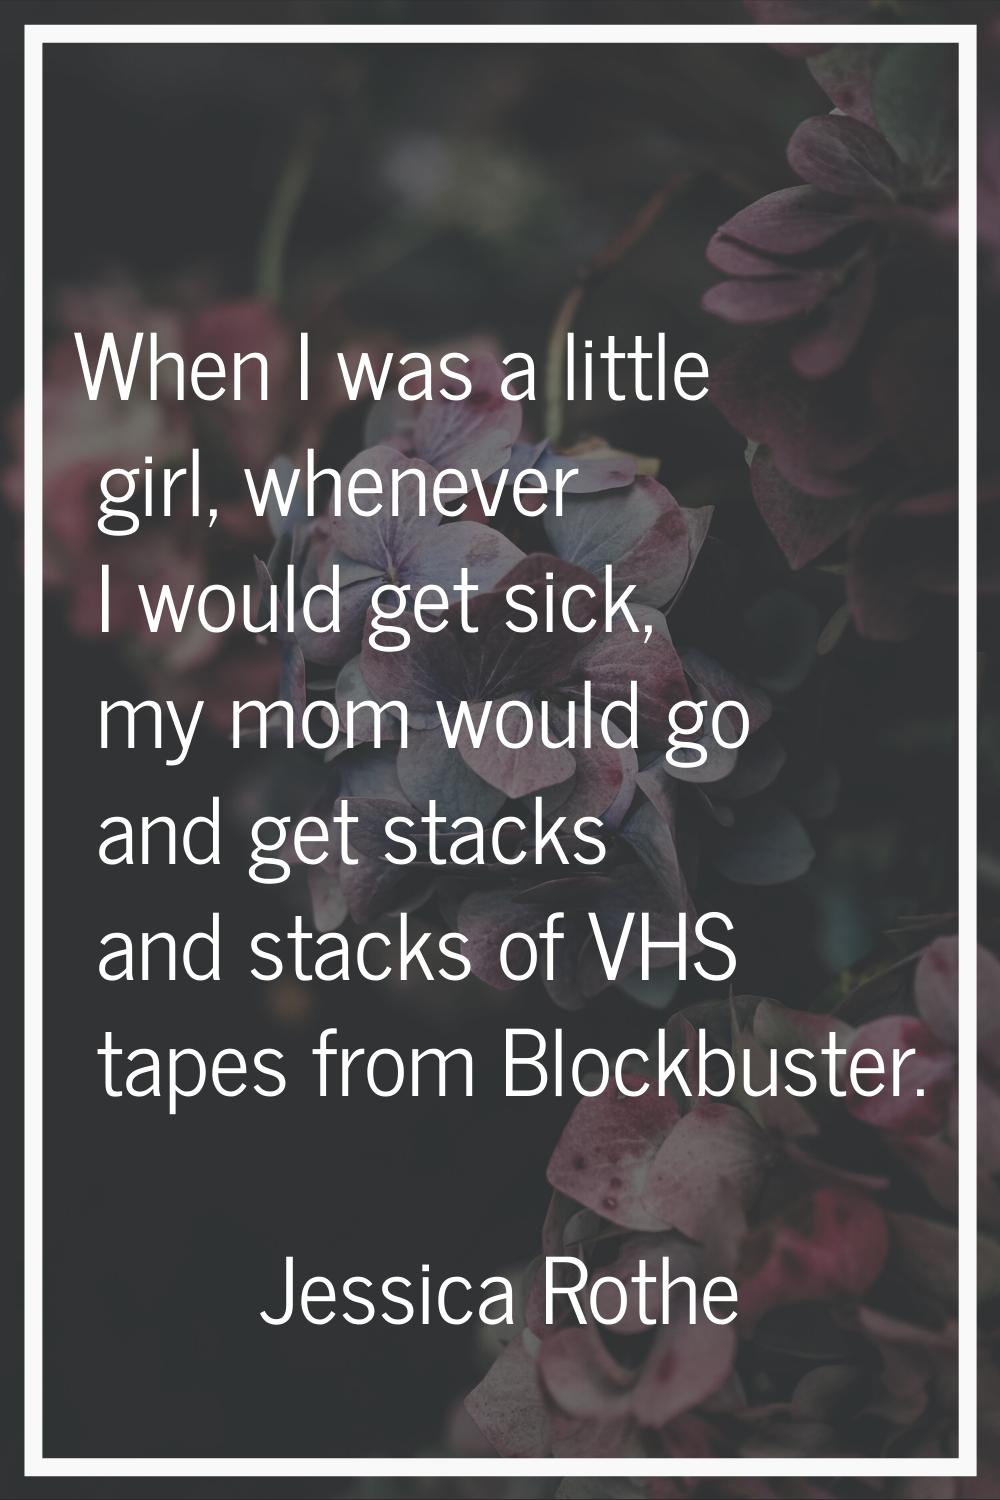 When I was a little girl, whenever I would get sick, my mom would go and get stacks and stacks of V